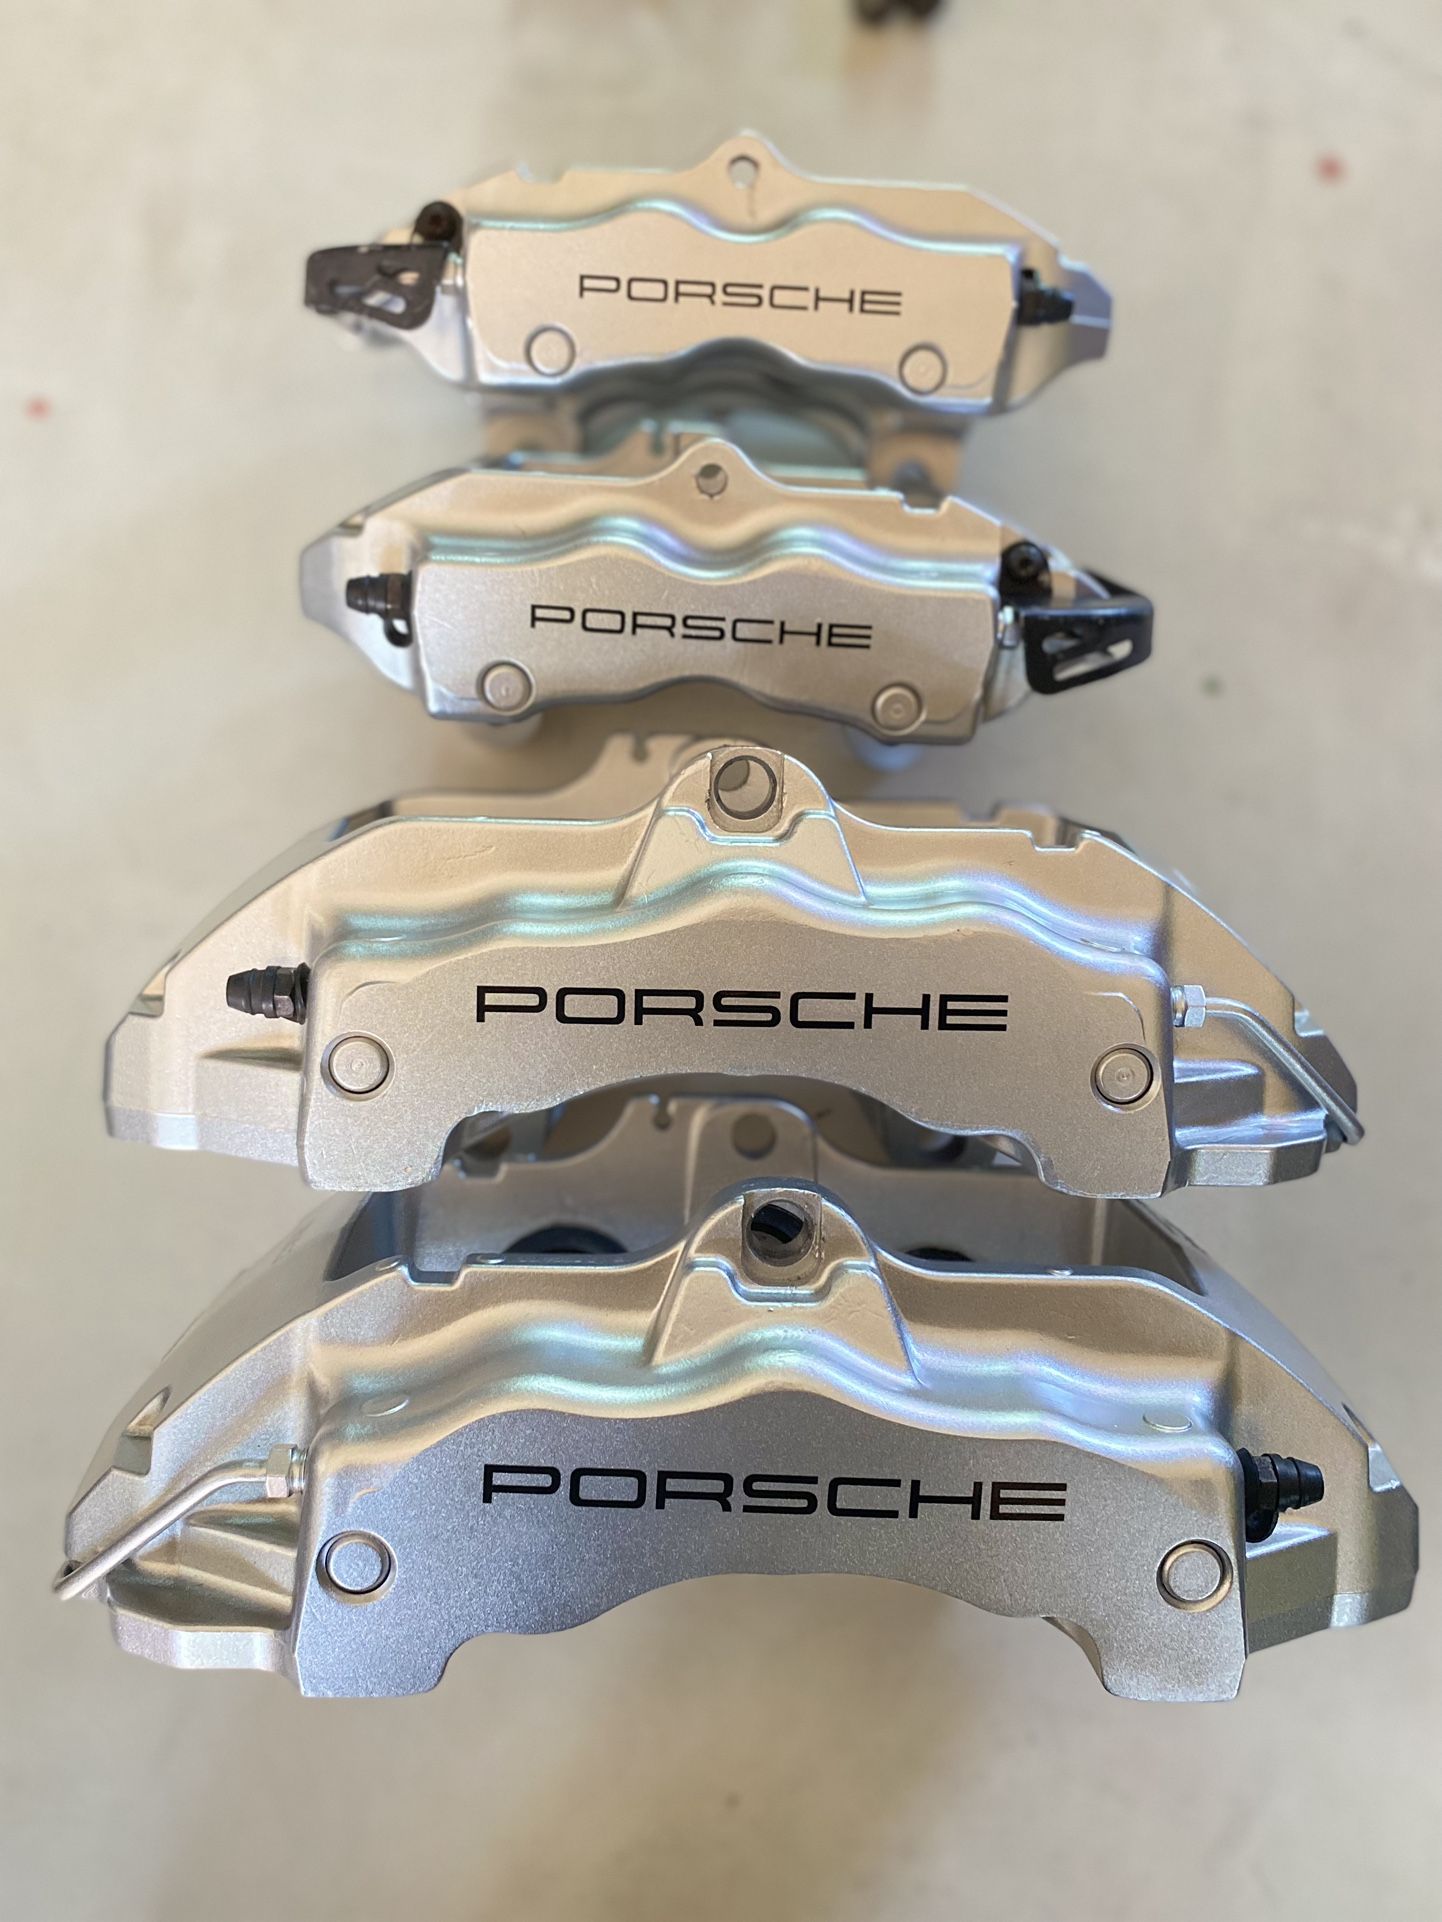 Used, Like New 2004-15 Porsche Cayenne - Audi Q7 - WV  Touareg 18Z L/R Brembo Original 🇮🇹Front and Rear Brake Calipers Set **Firme Price**